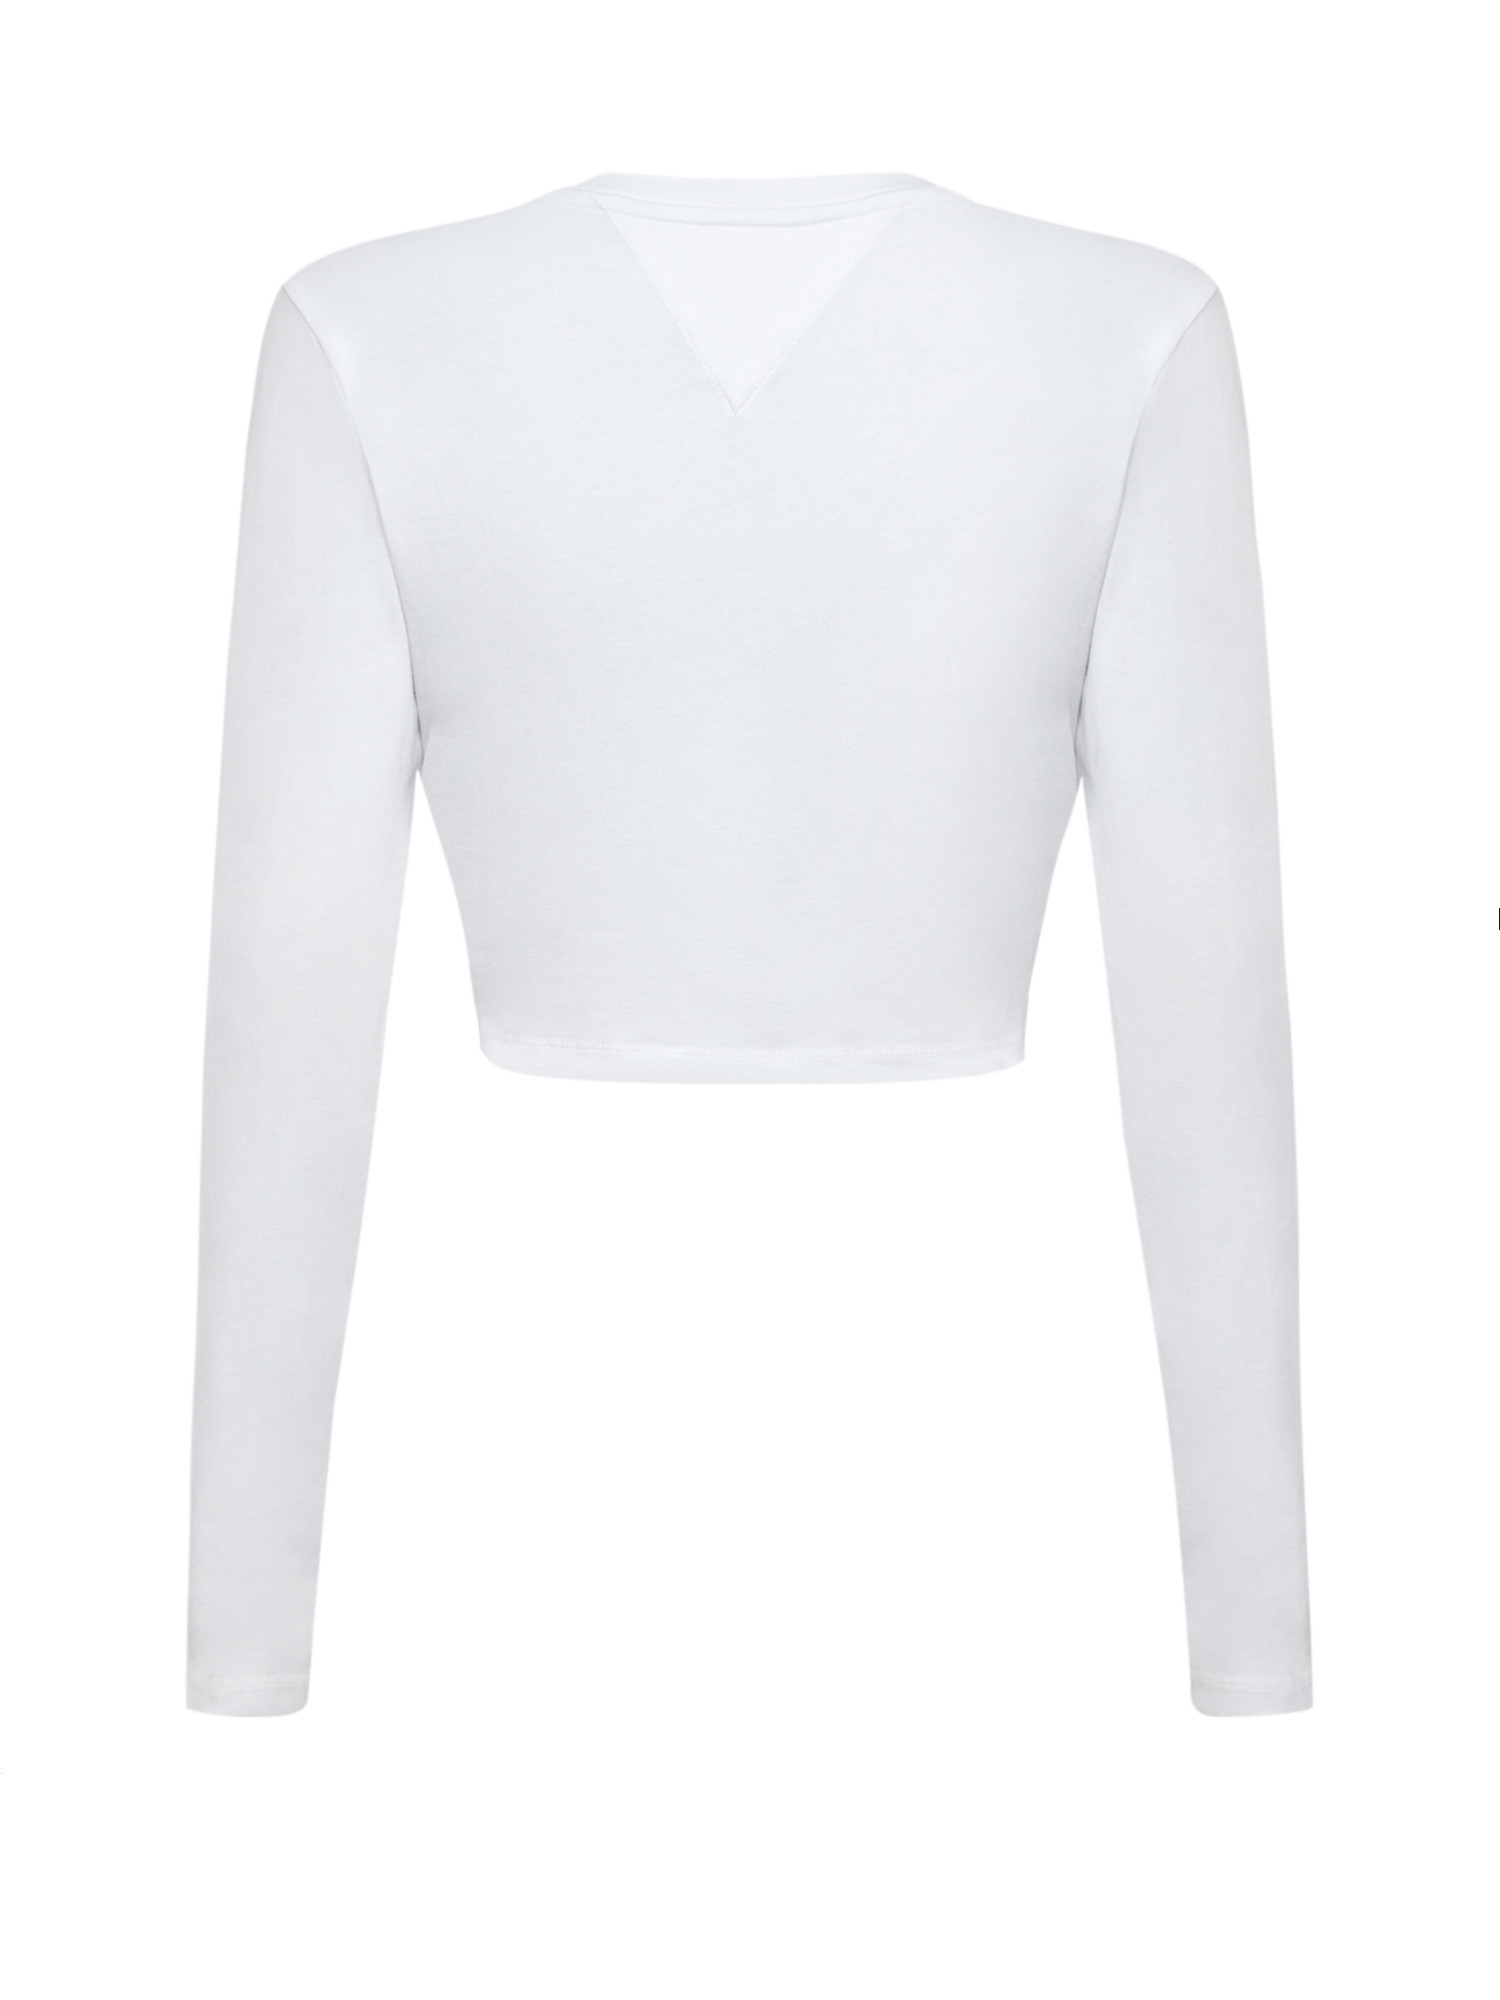 Tommy Jeans - Crop top in cotone con logo, Bianco, large image number 1